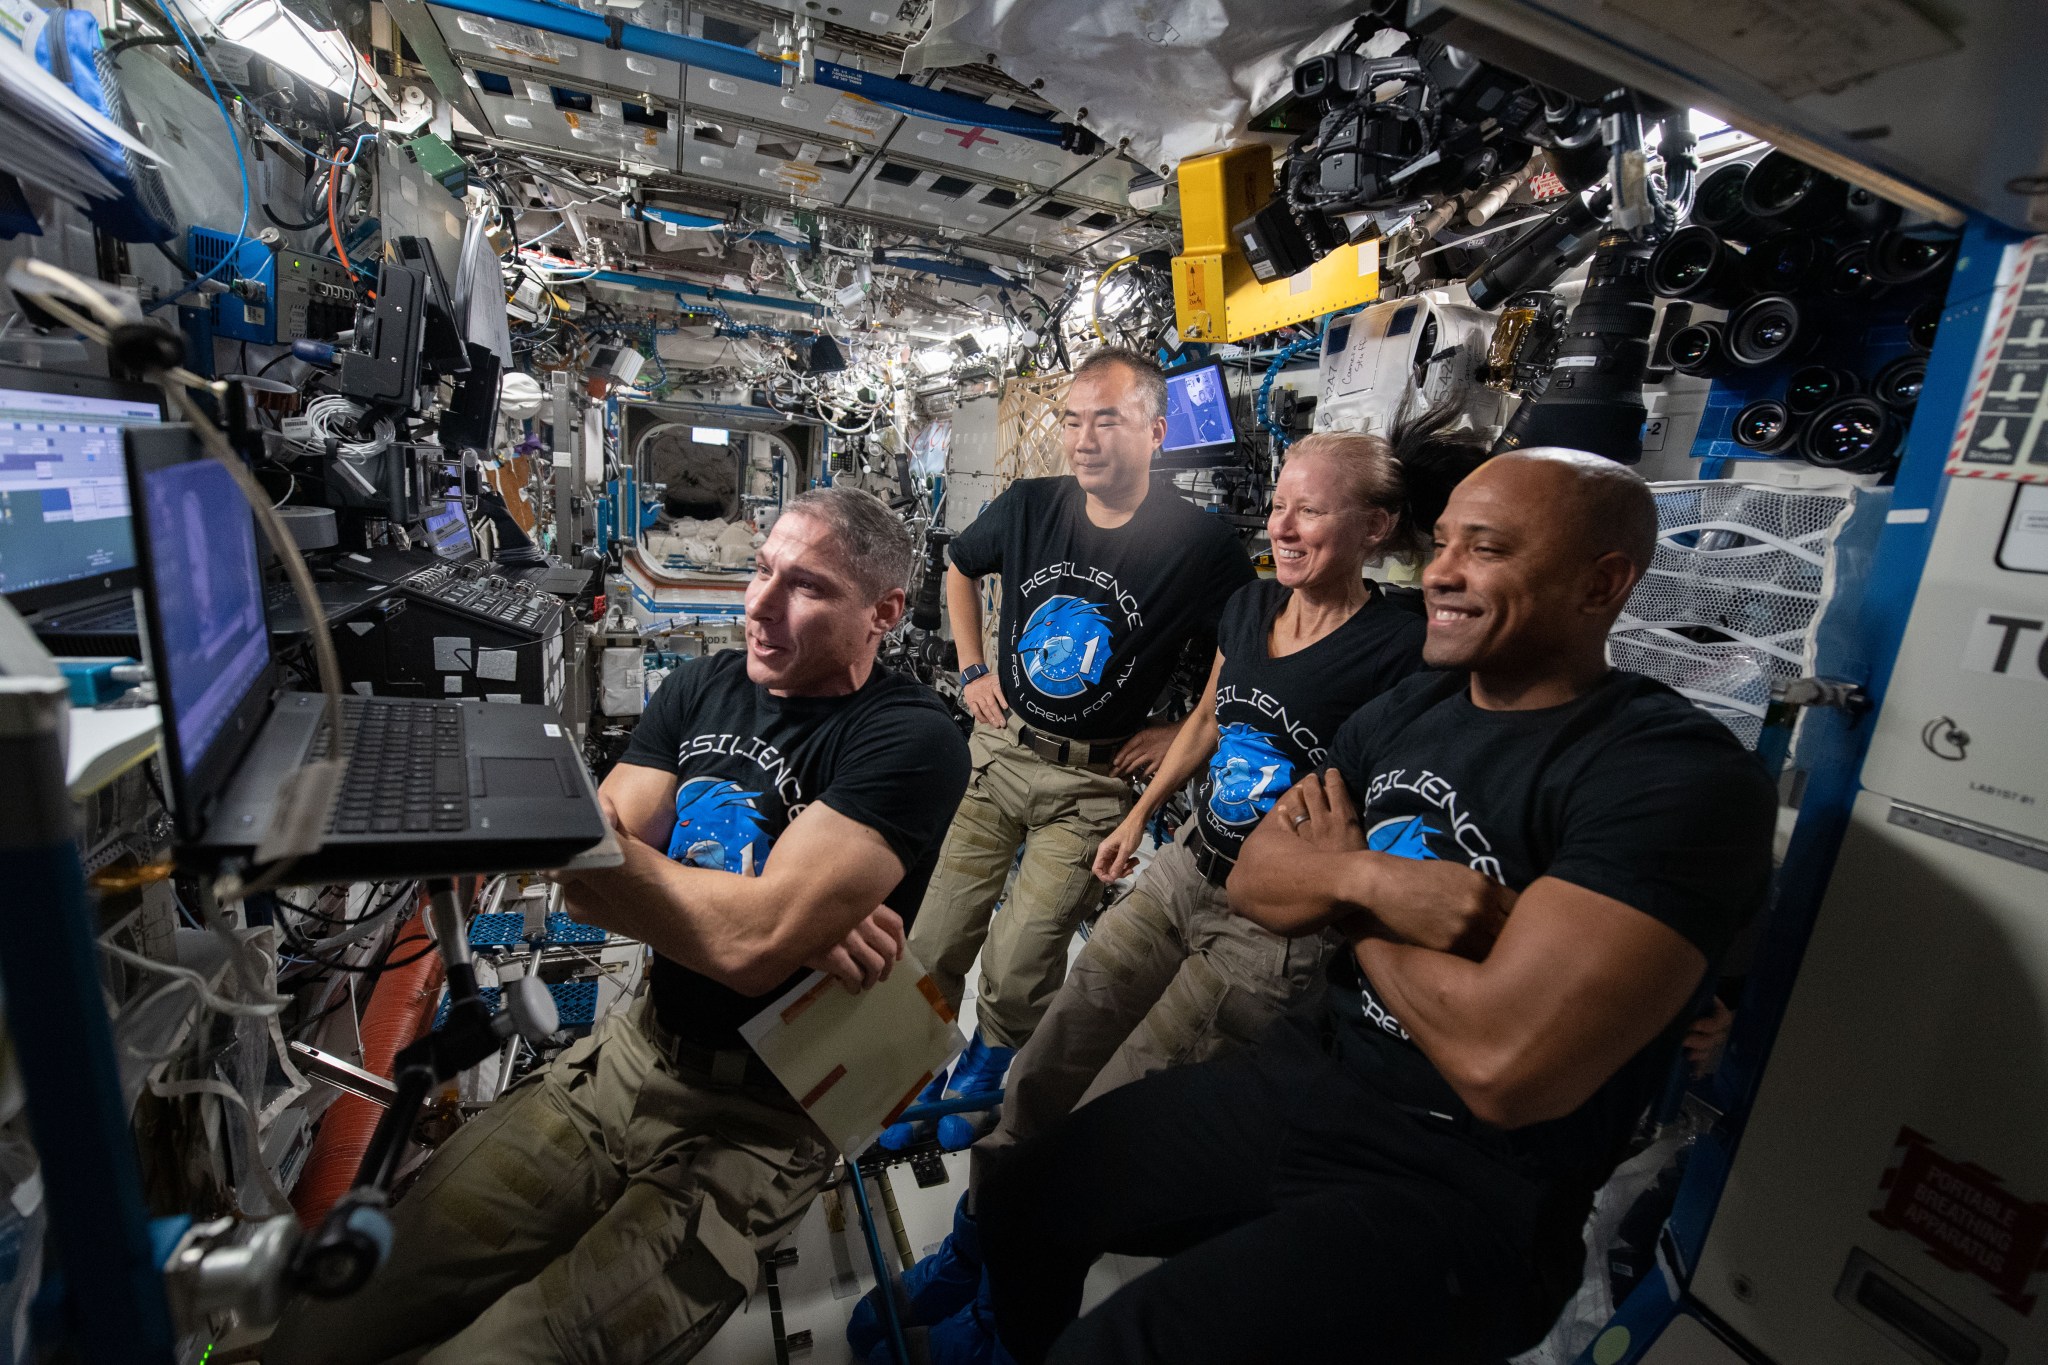 ISS crew conducting a video conference onboard